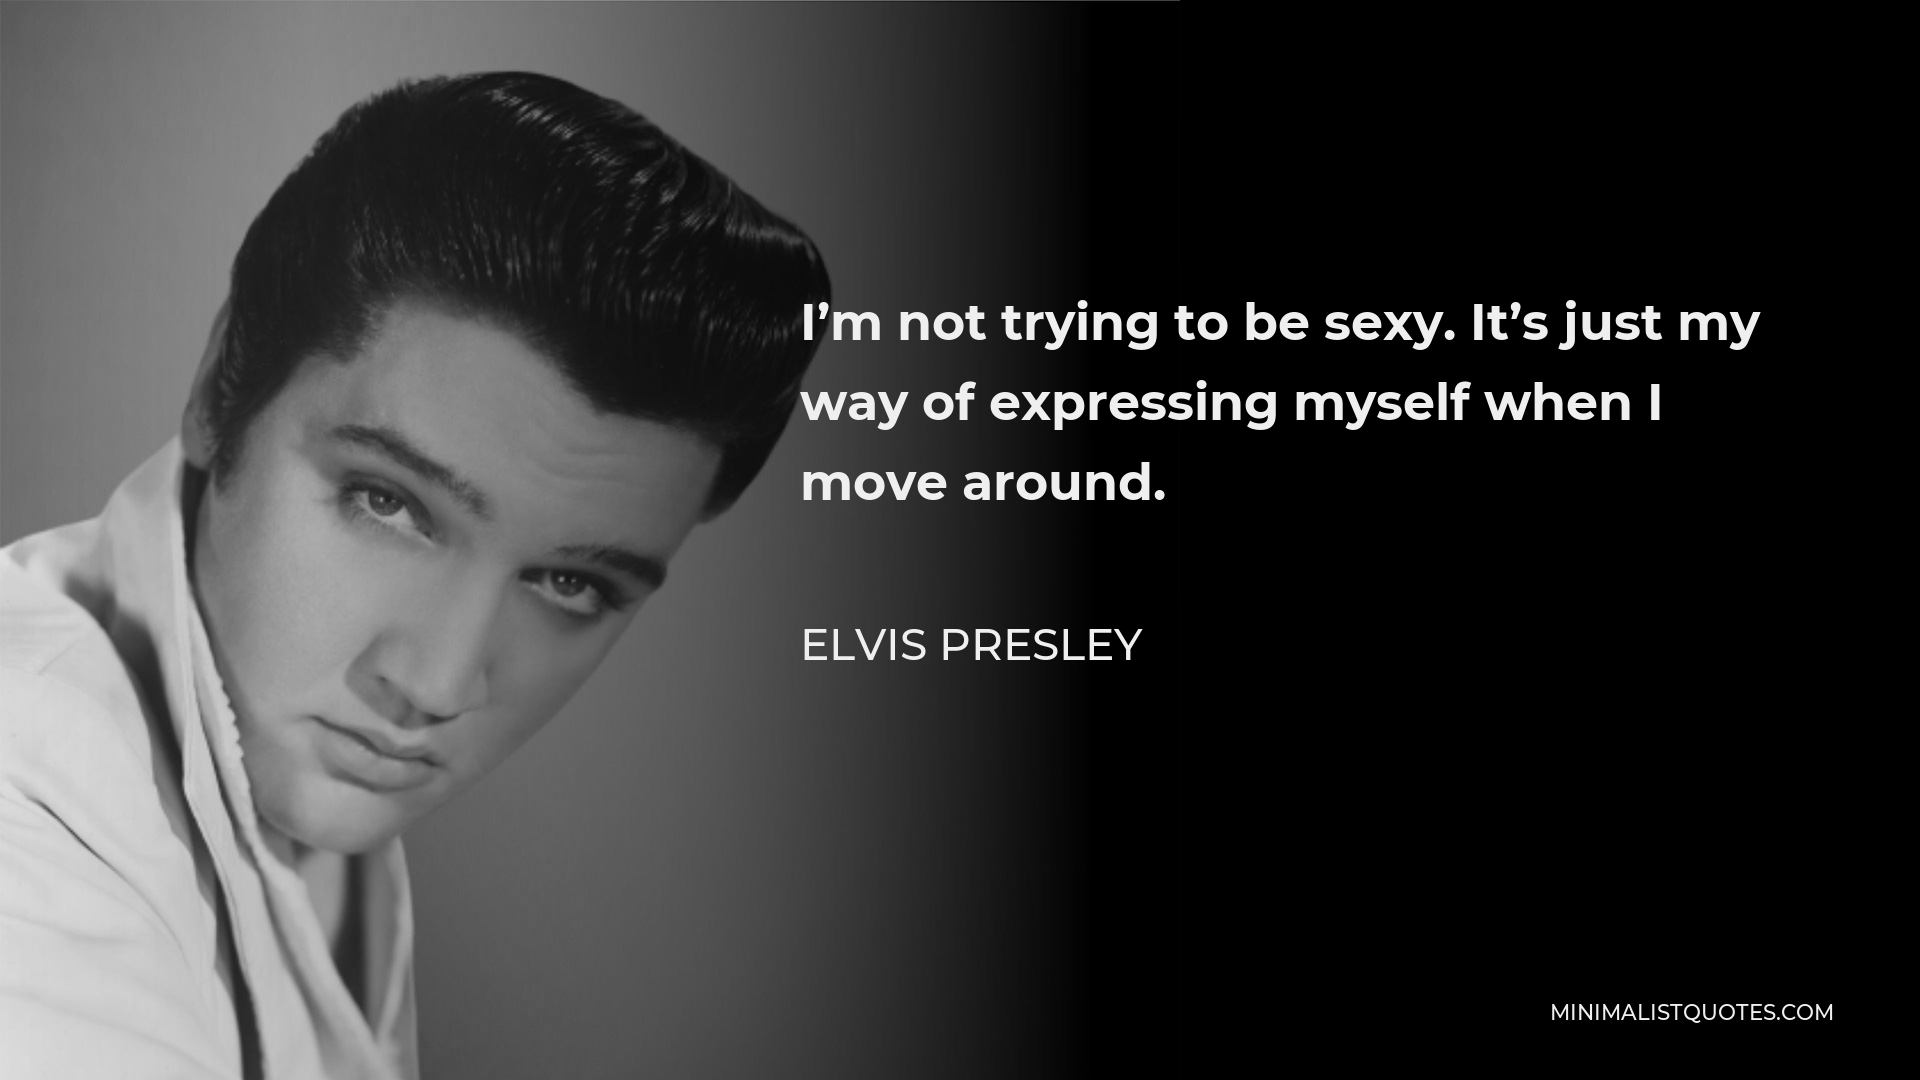 Elvis Presley Quote - I’m not trying to be sexy. It’s just my way of expressing myself when I move around.